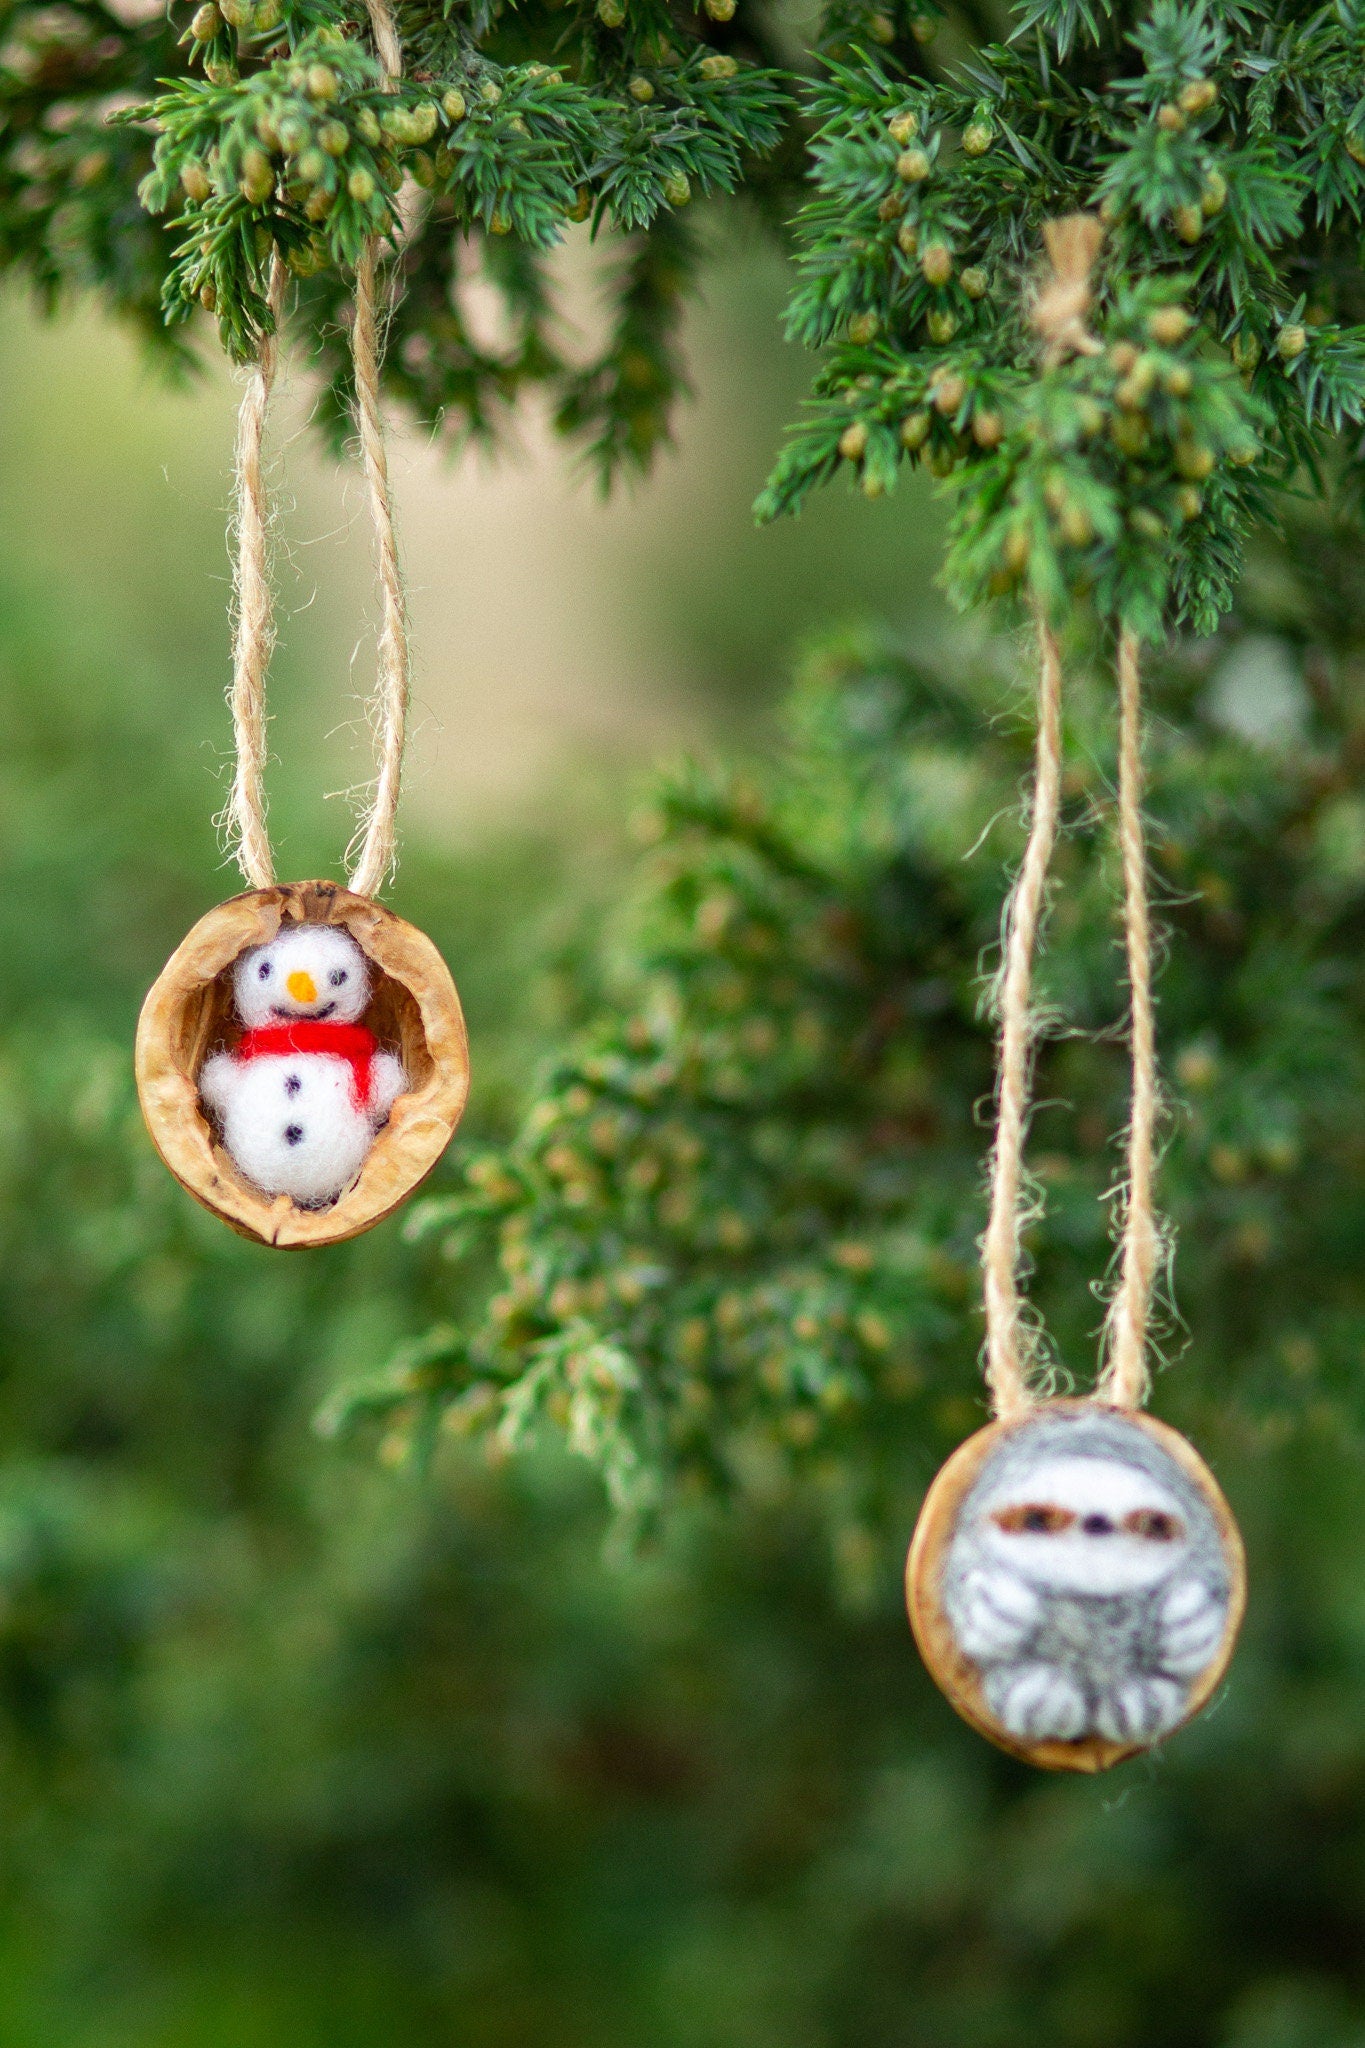 Snowman in a Nutshell Christmas Ornament